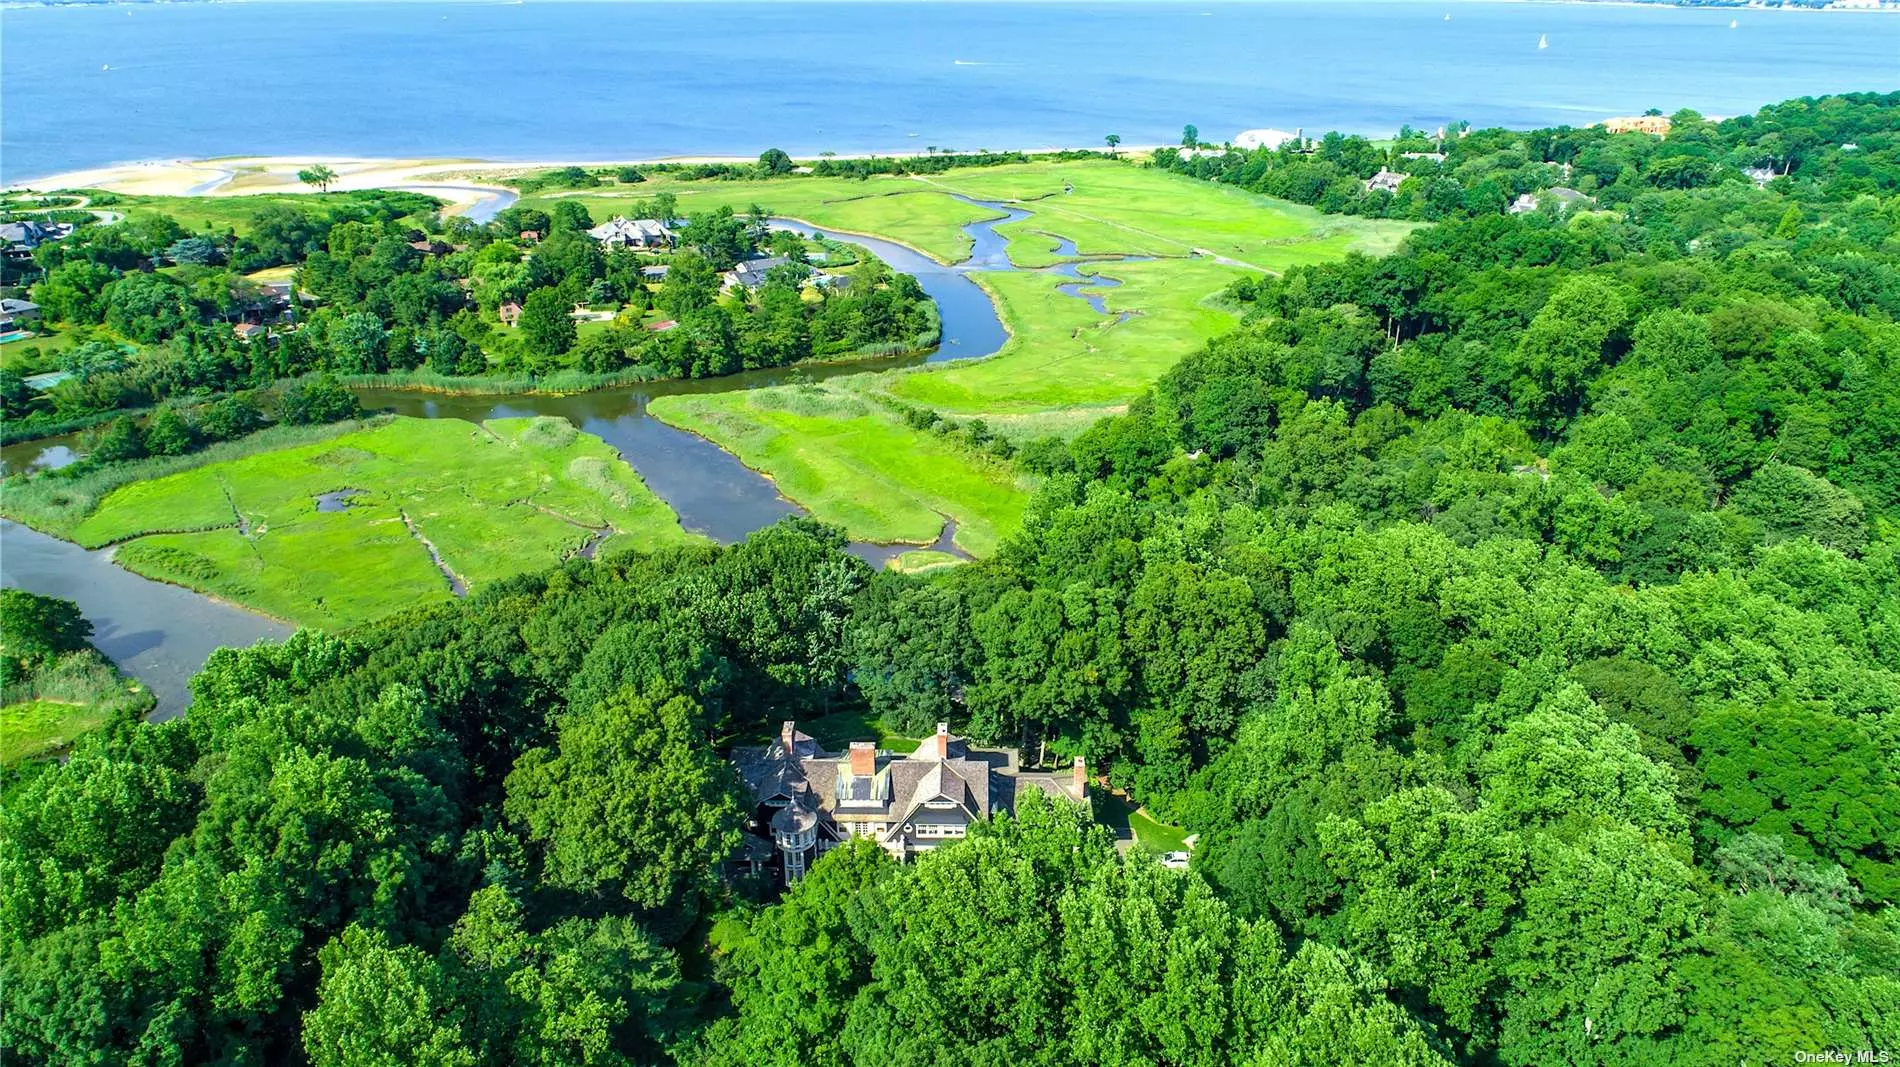 Osprey Landing is an incredible compound including a custom built architecturally crafted 12, 000 sq. ft residence designed by Shoppe Reno Warton Associates and a picture perfect landscape palette on almost nine acres offering panoramic views of the sound, salt marshes and meadows designed by Oehme Van Sweden Associates. In addition, there is a heated saltwater pool with cabana/kitchen and bath. Located in the Inc. Village of Sands Point with private police, sanitation and access to membership at the Village Club of Sands Point with golf, tennis, pool, dining and event space. (2022 taxes to be reduced)